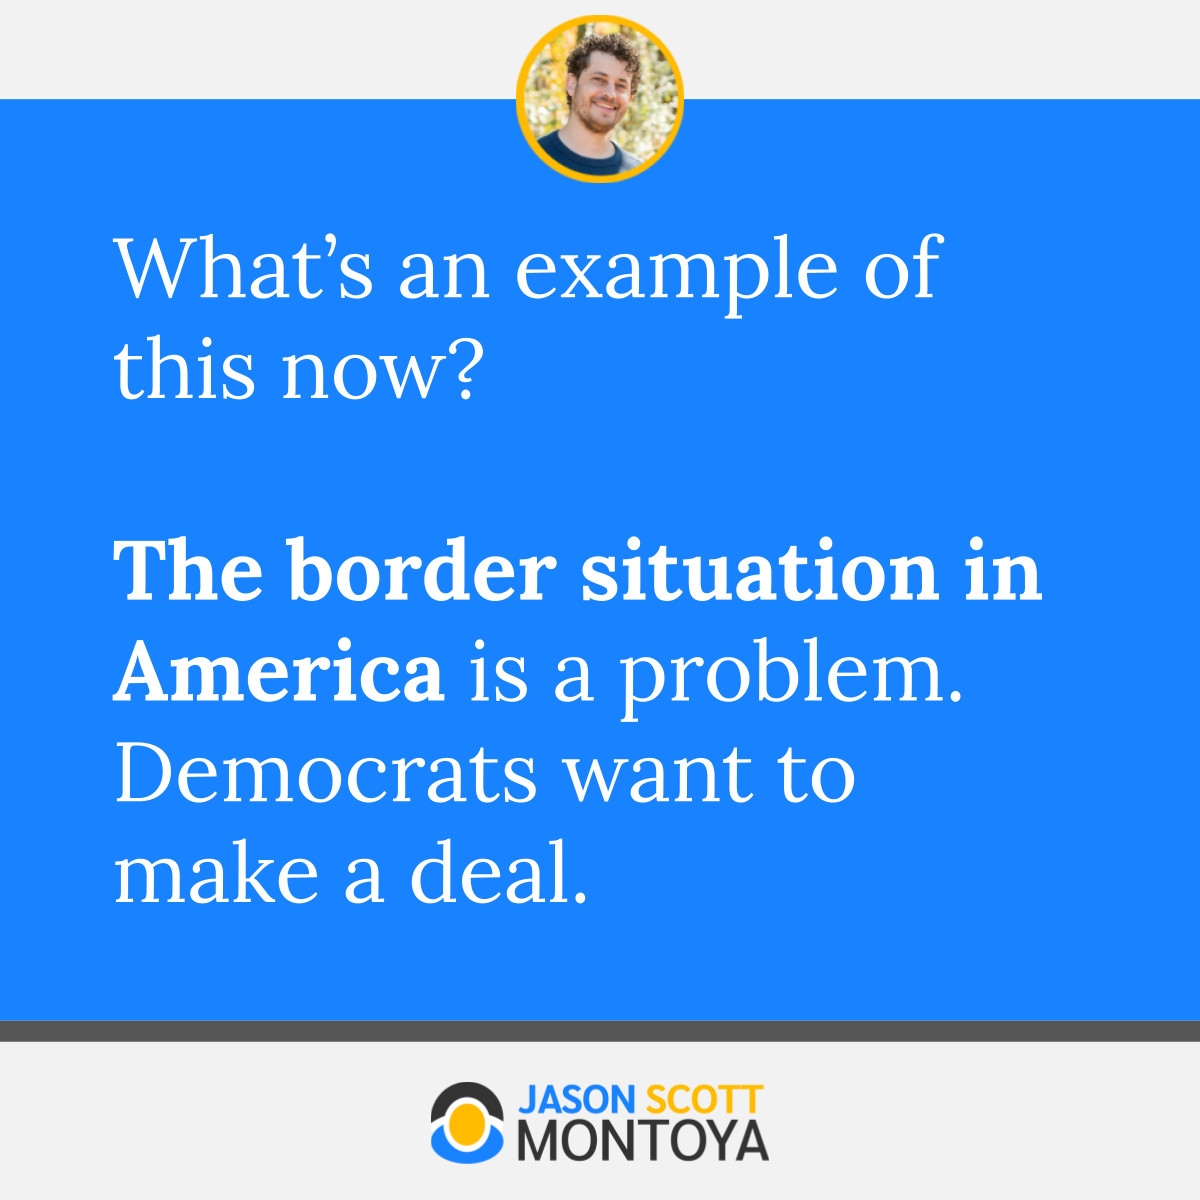 What’s an example of this now?  The border situation in America is a problem. Democrats want to make a deal.